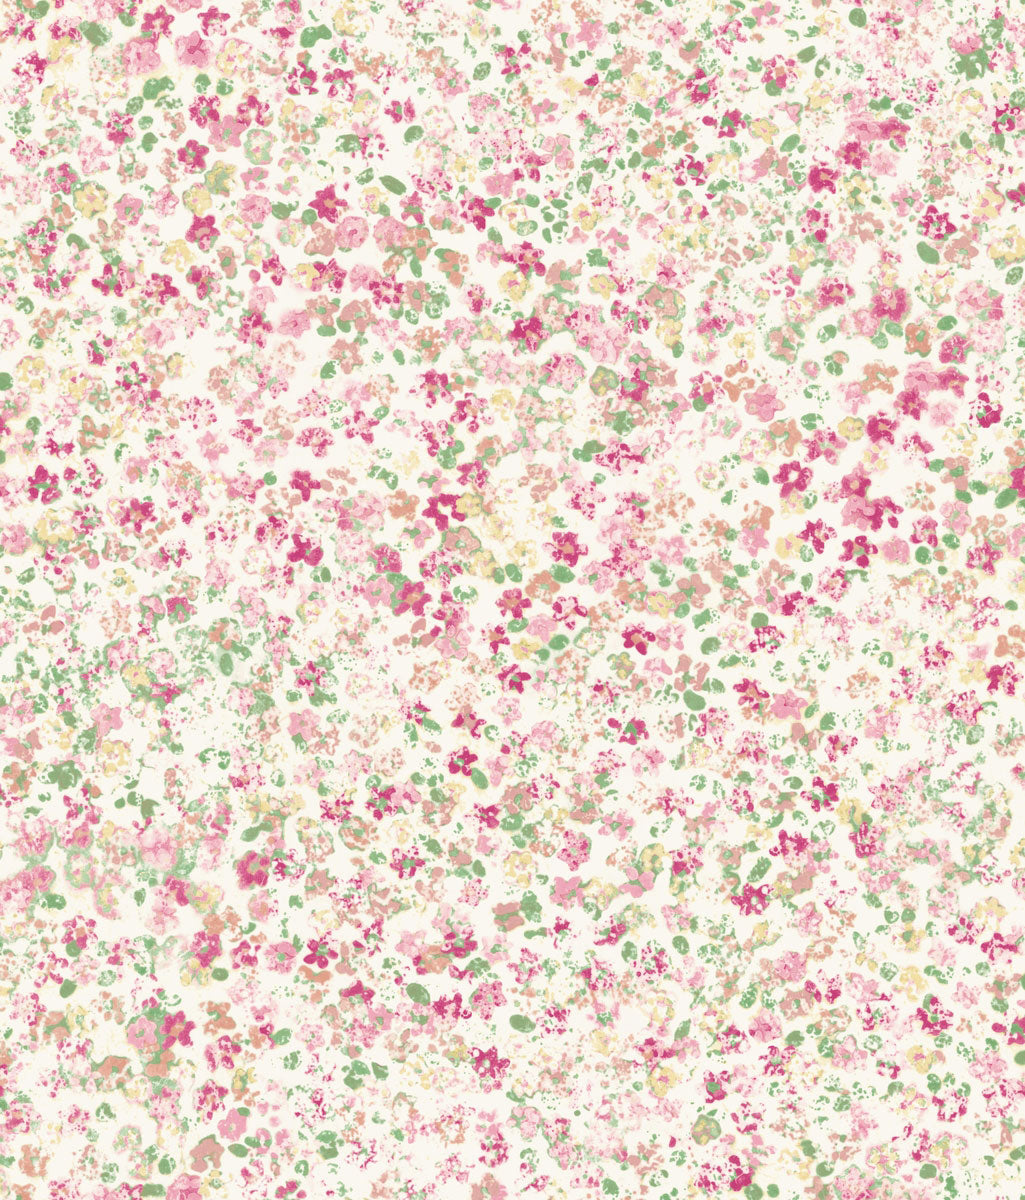 Magnolia Home Meadow Wallpaper - SAMPLE SWATCH ONLY